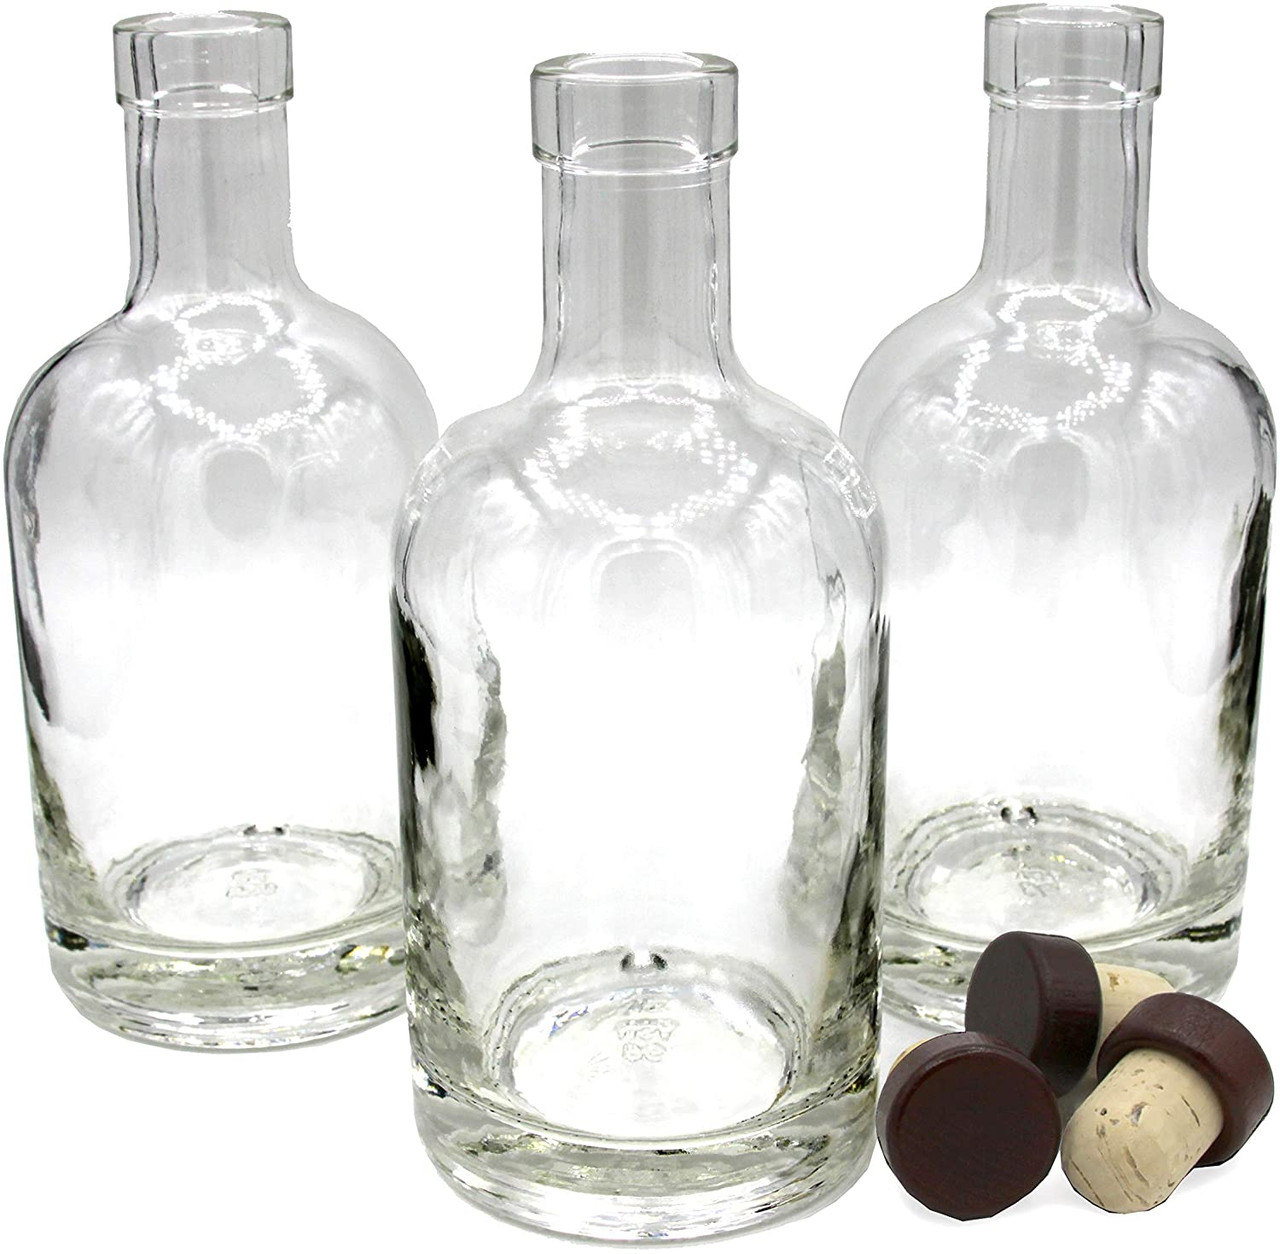 3 pcs 12 oz Heavy Base Glass Liquor Bottles with T-Top Synthetic